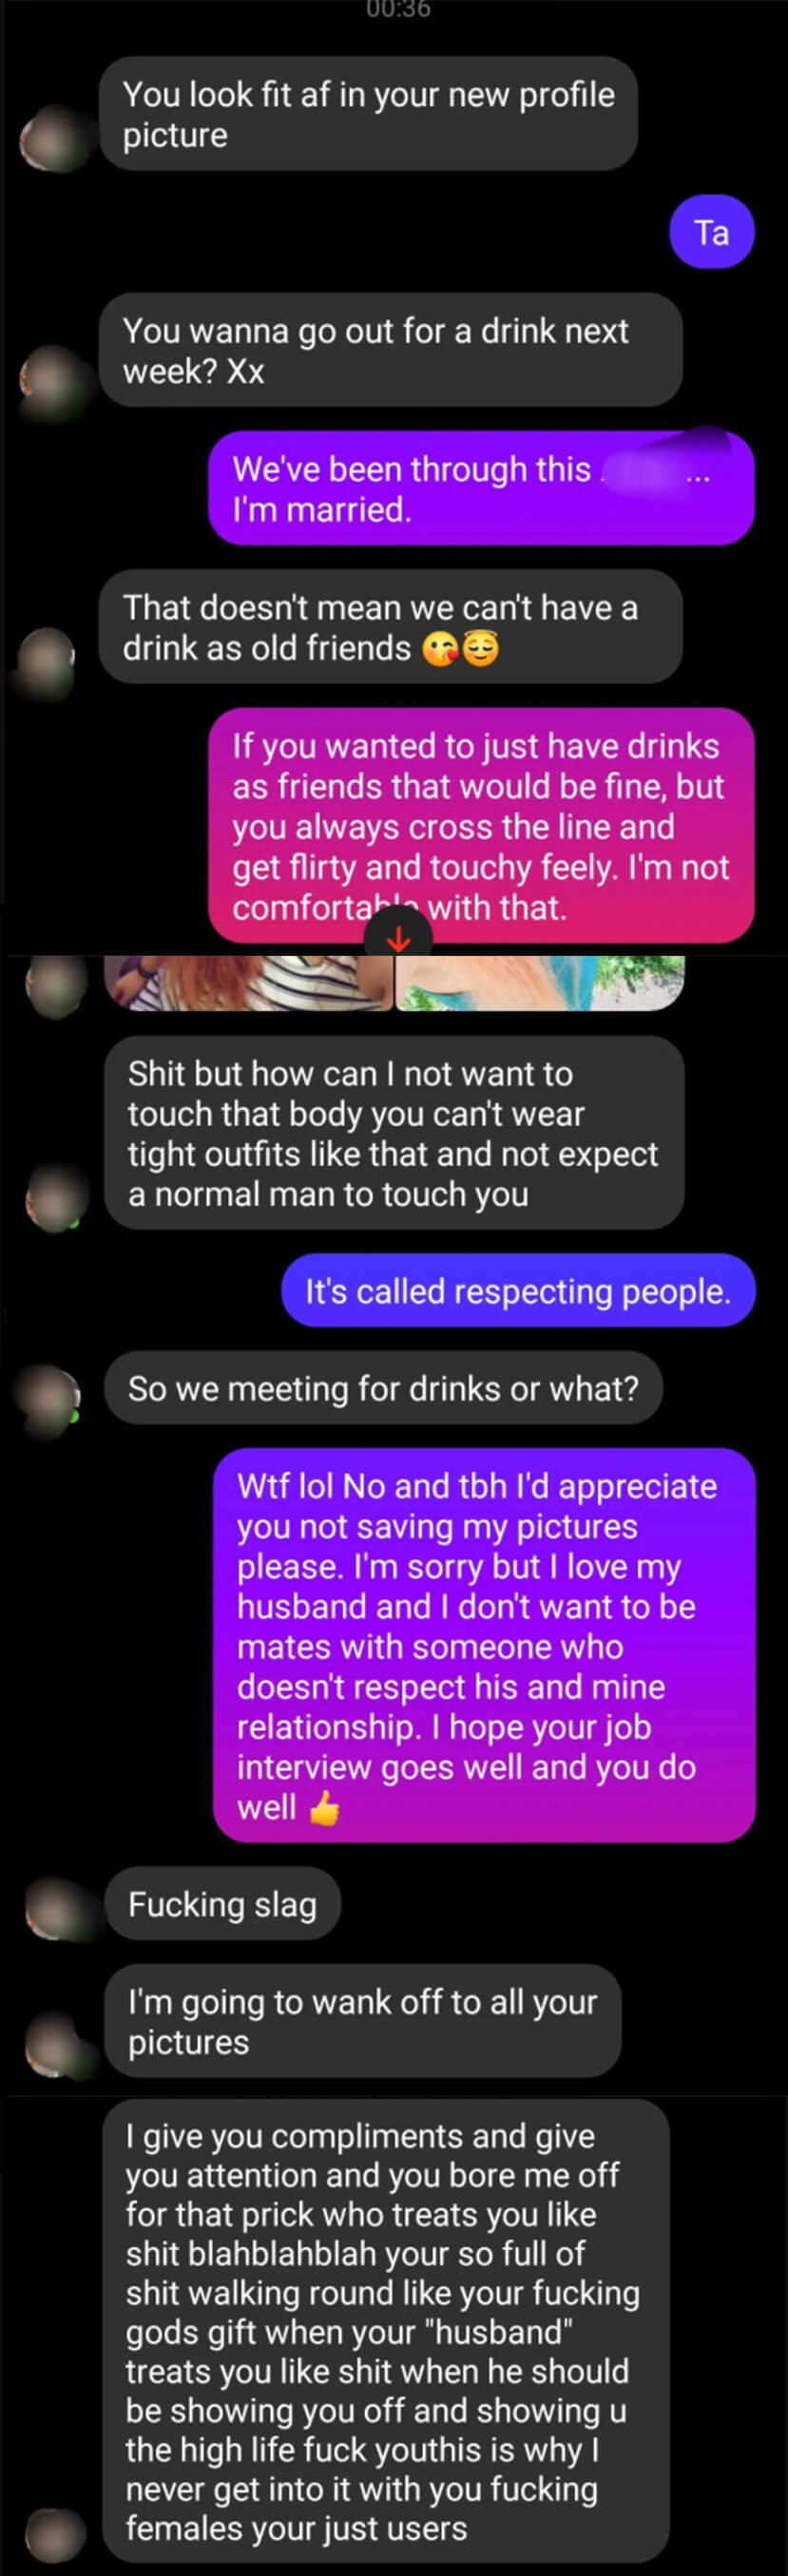 guy asks girl to go out for drinks, girl says she&#x27;s married and he always gets flirty, he sends pictures saying she can&#x27;t dress like that and expect men not to want her, and the girl rejects him again, so he calls her a &quot;slag&quot; and a &quot;user&quot;